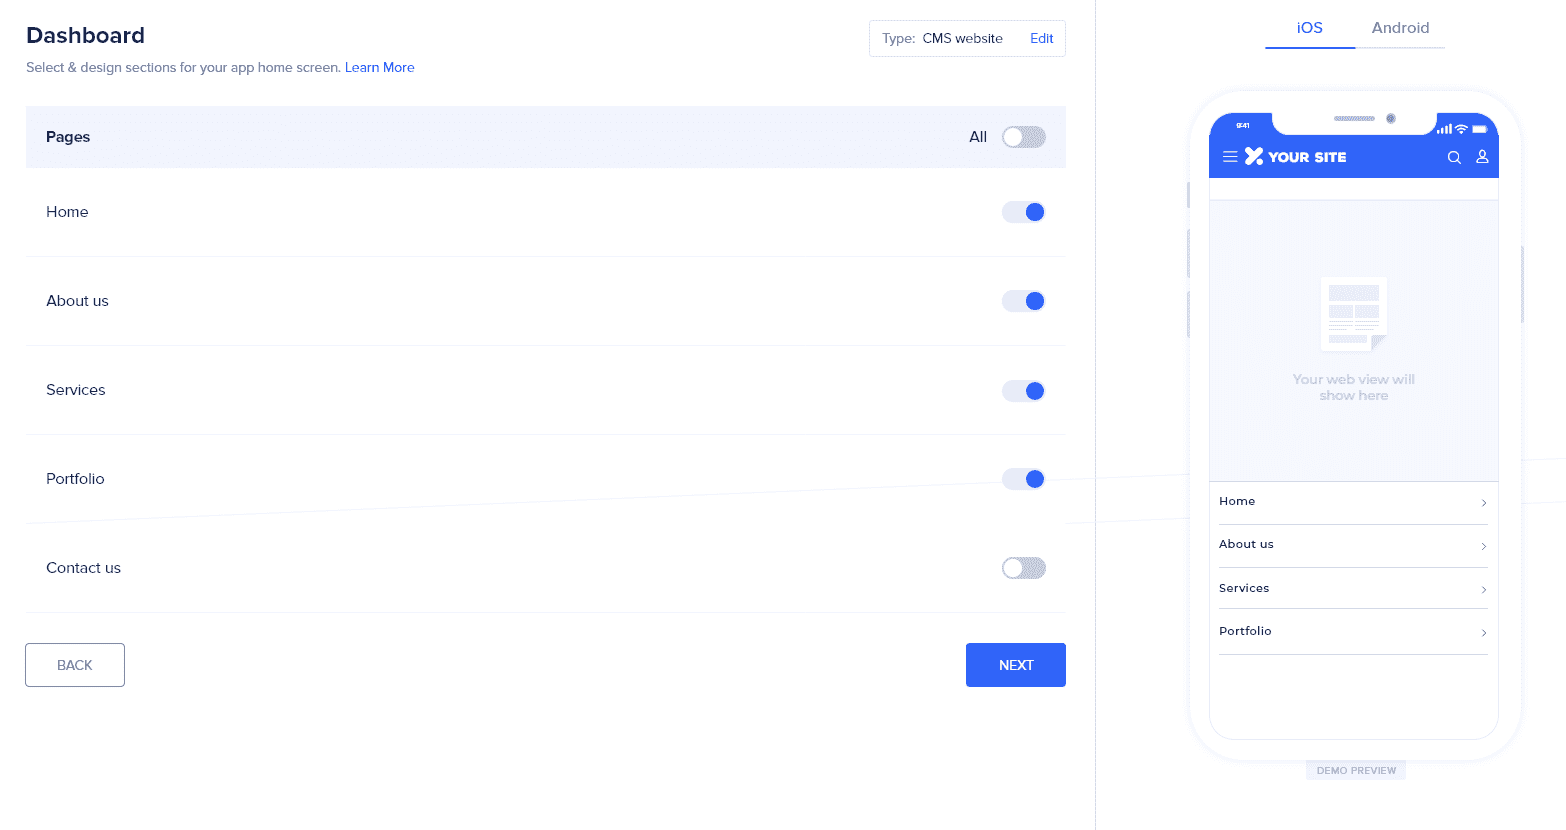 select pages